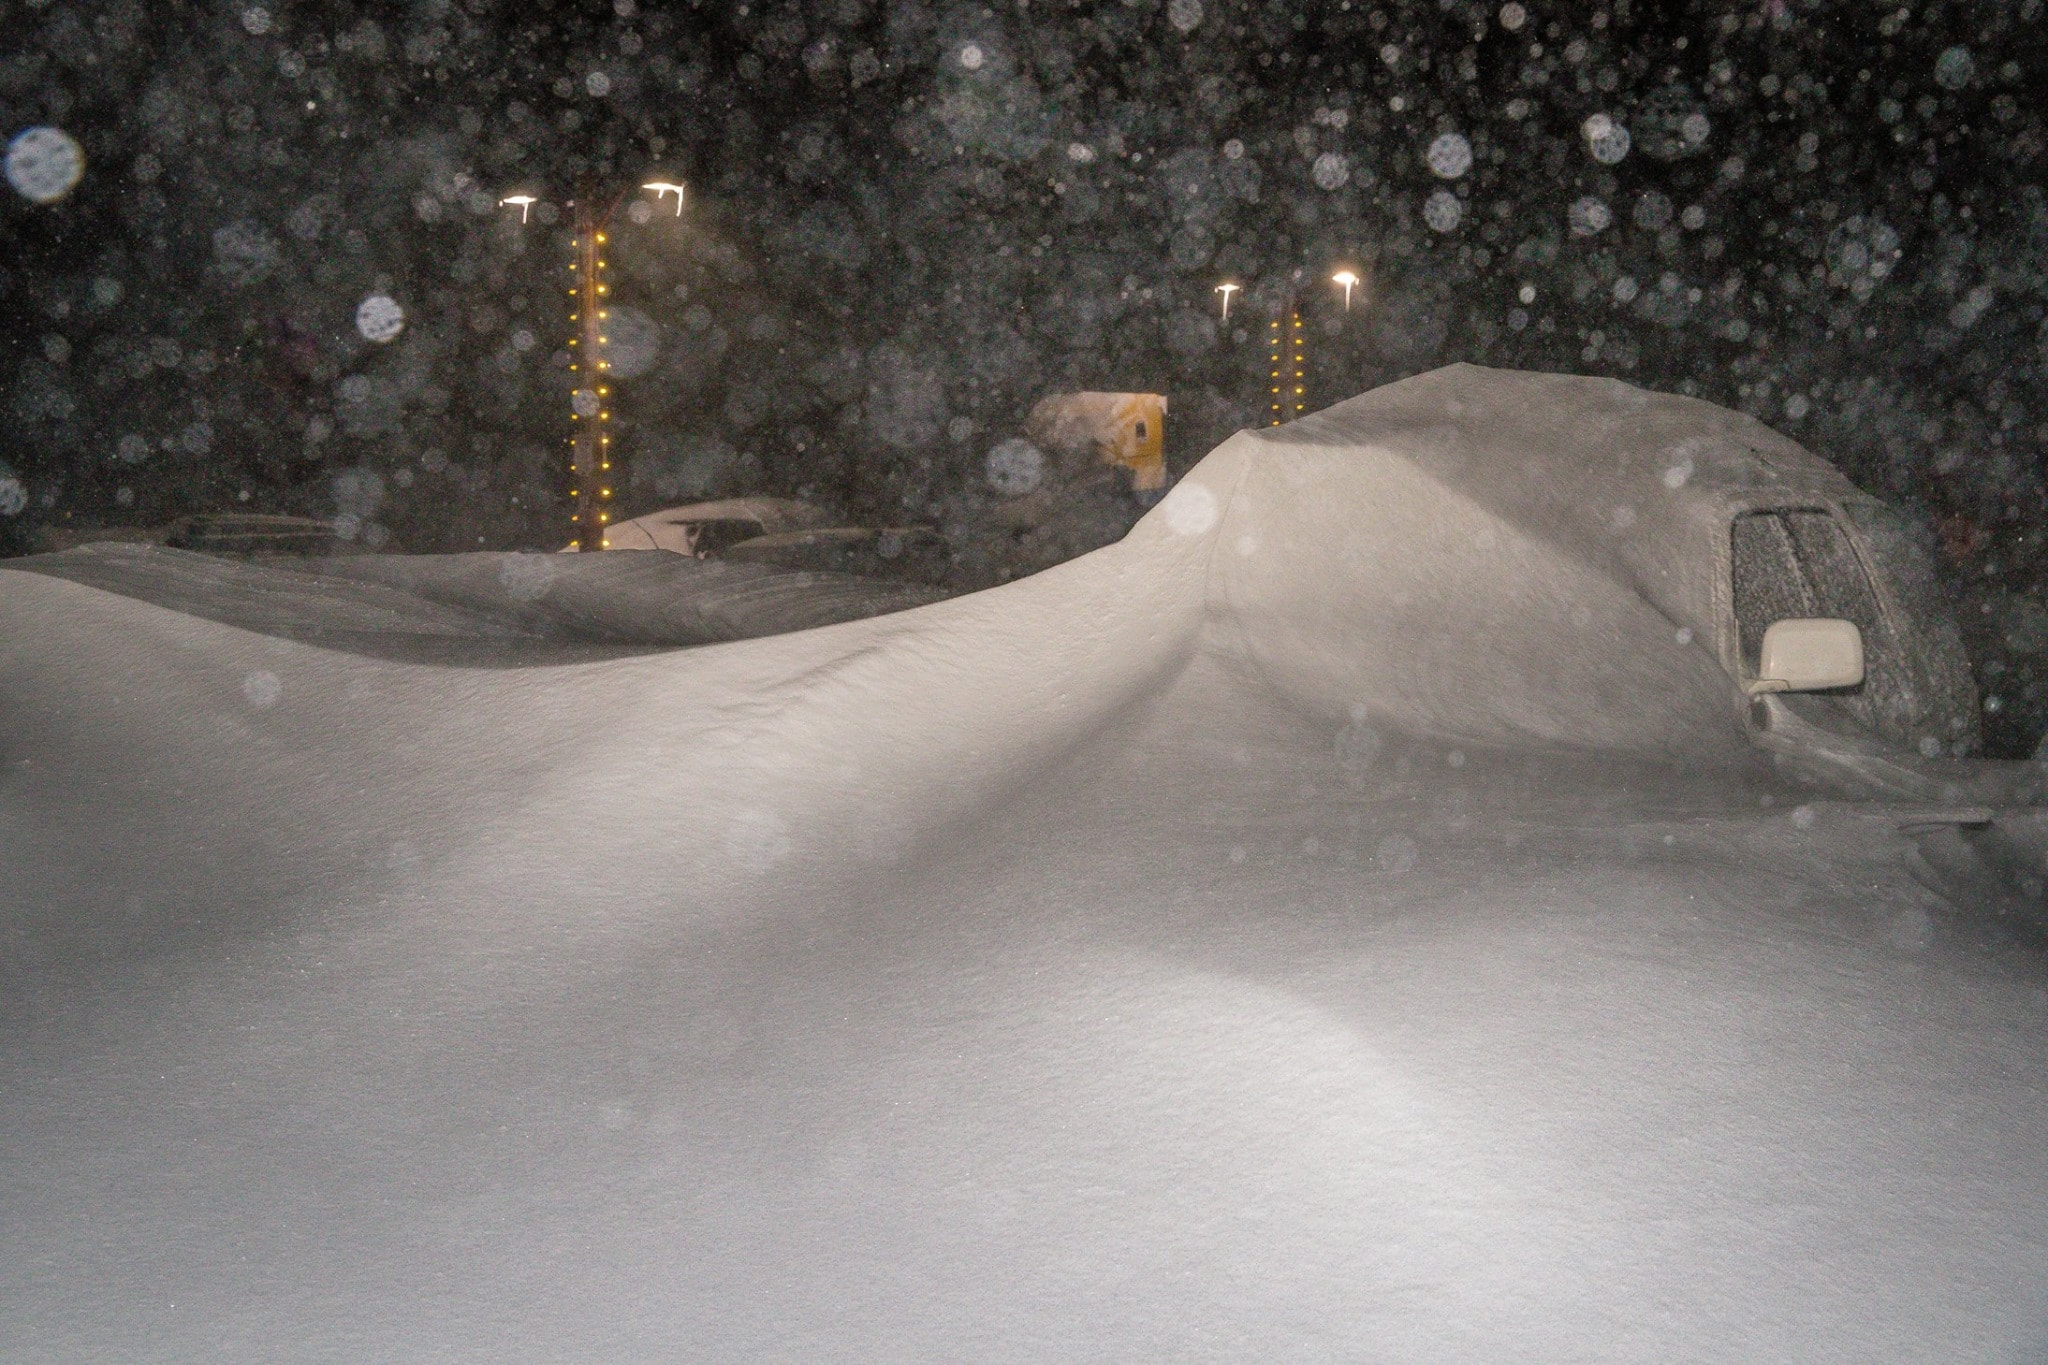 Mammoth parking lot today.  image:  mammoth